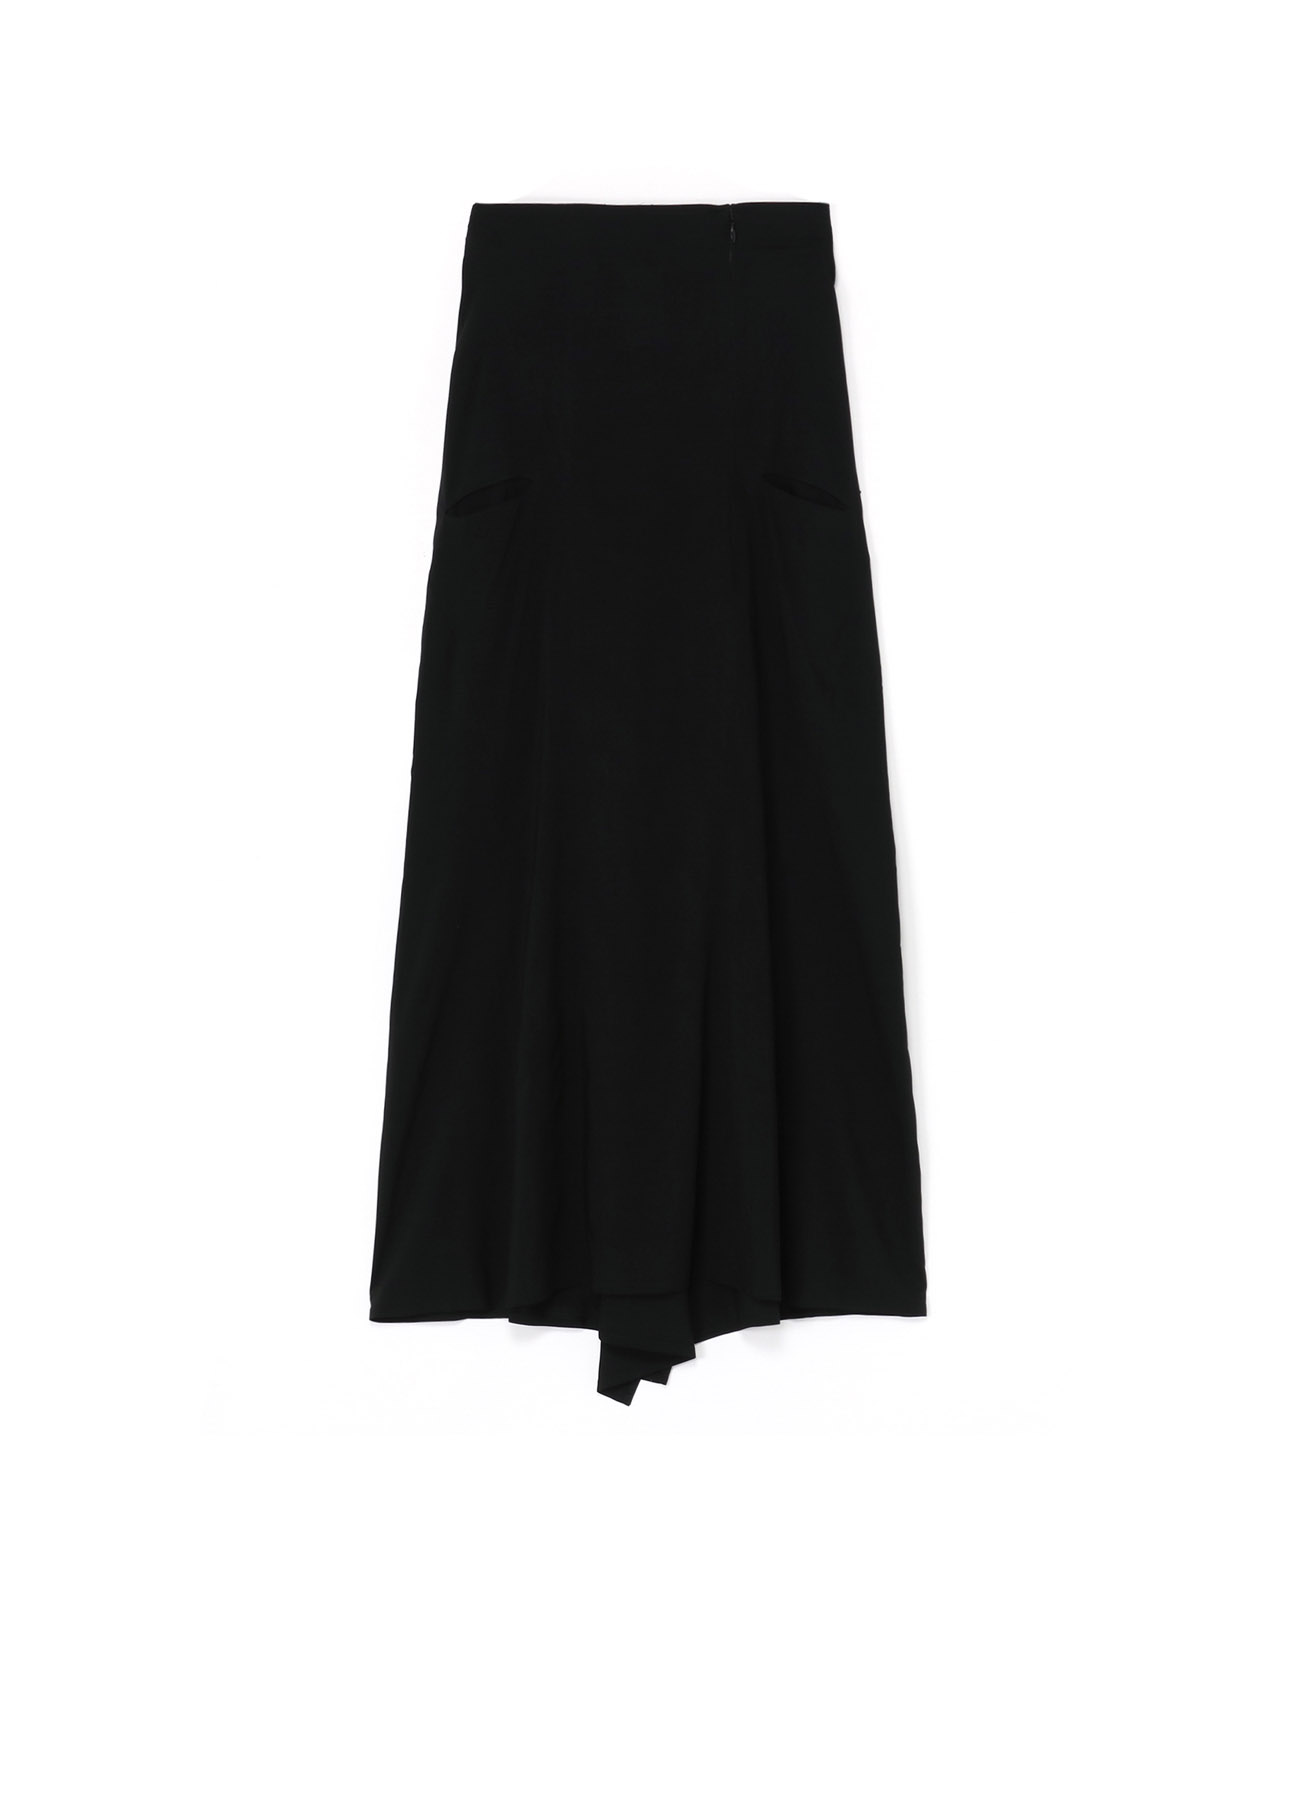 【Launching 10:00(JST), March 29th】HIGH-WAISTED SKIRT WITH BACK DRAPE